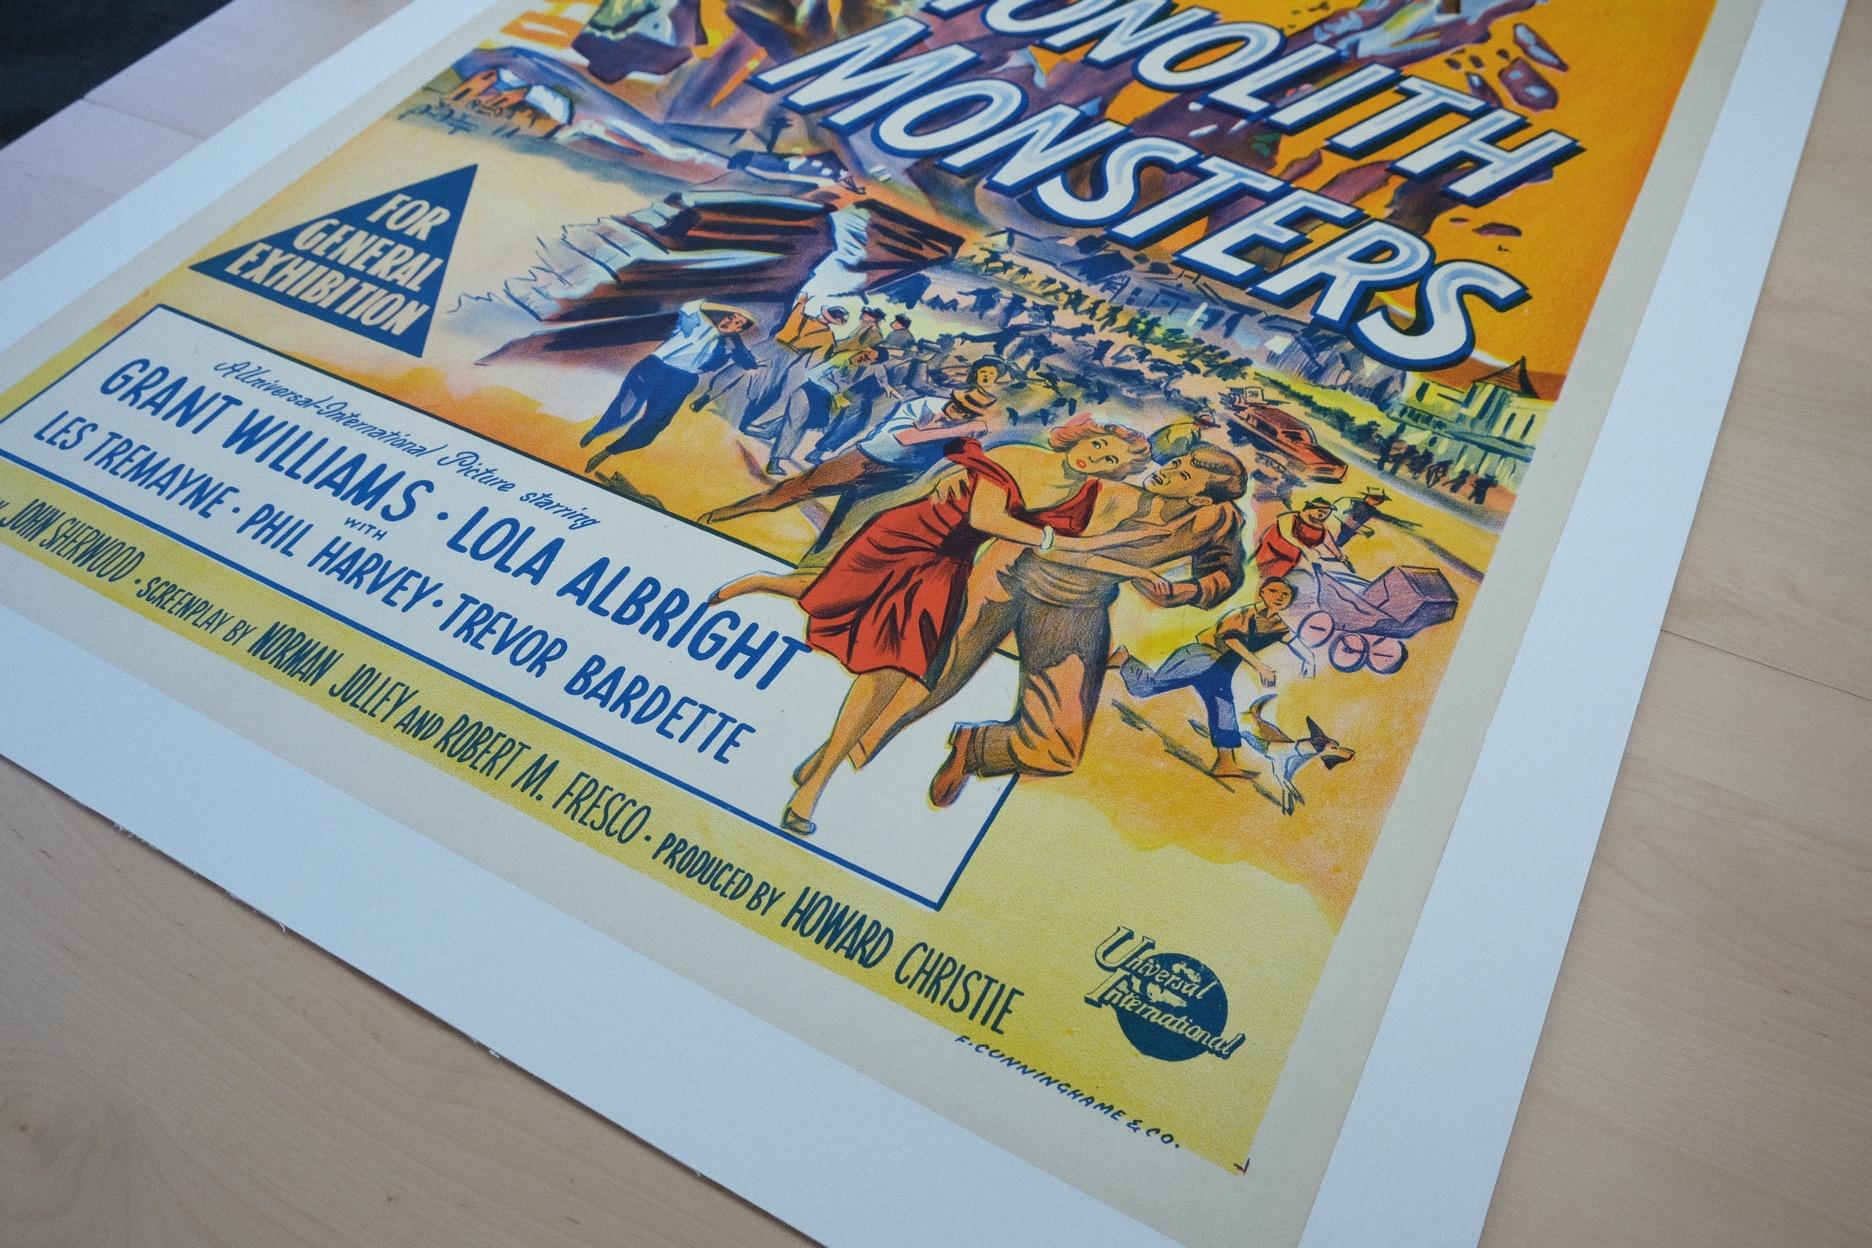 Size: One-Sheet

Condition: Mint

Dimensions: 1150mm x 780mm (inc. Linen Border)

Type: Original Lithographic Print - Linen Backed

Year: 1957

Details: A rare original poster for the classic 1957 Sci-Fi film ‘The Monolith Monsters’. This